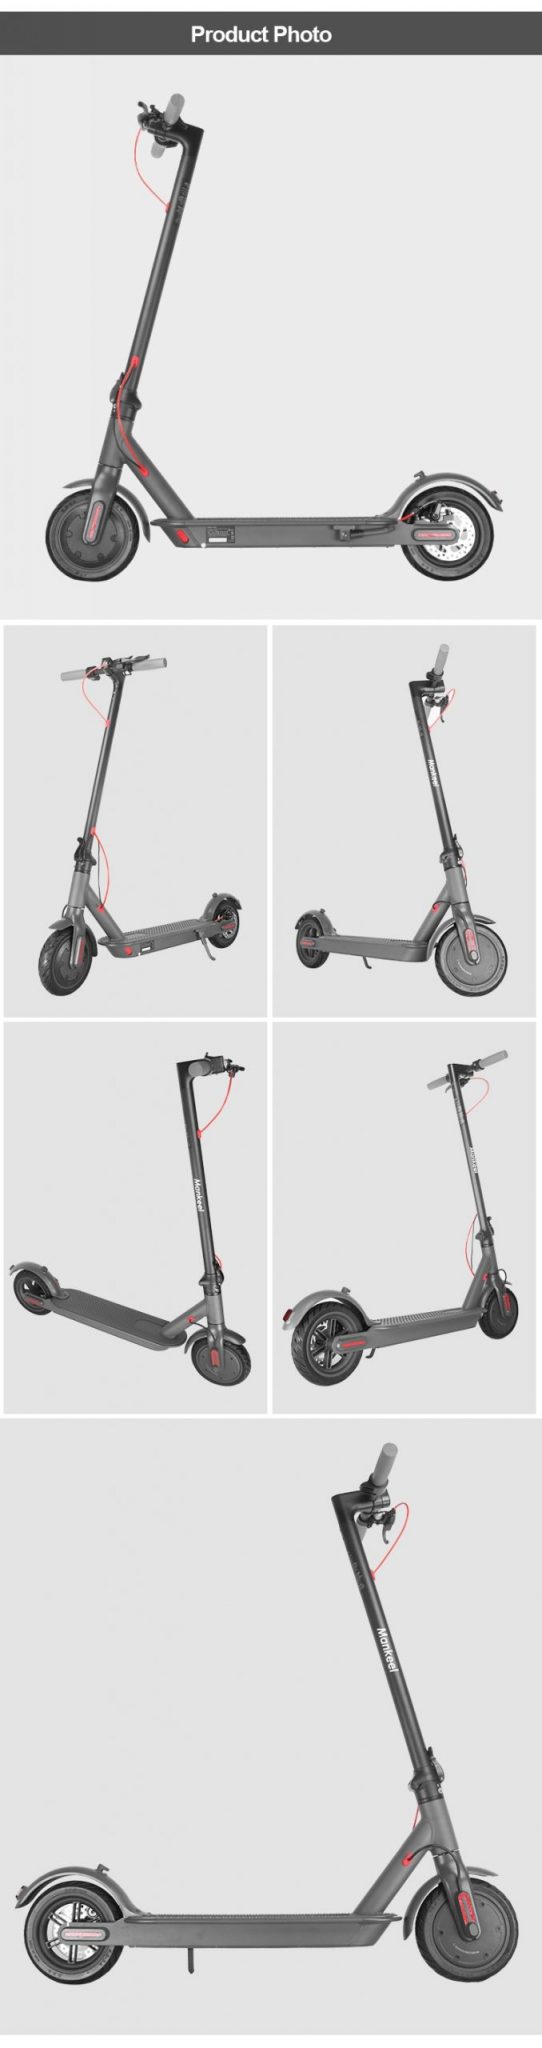 Electric Scooter 7.8Ah 25KM Range 350W Power Sport Foldable With Smart App/LED Display EU/US IN STOCK Fast Shipping